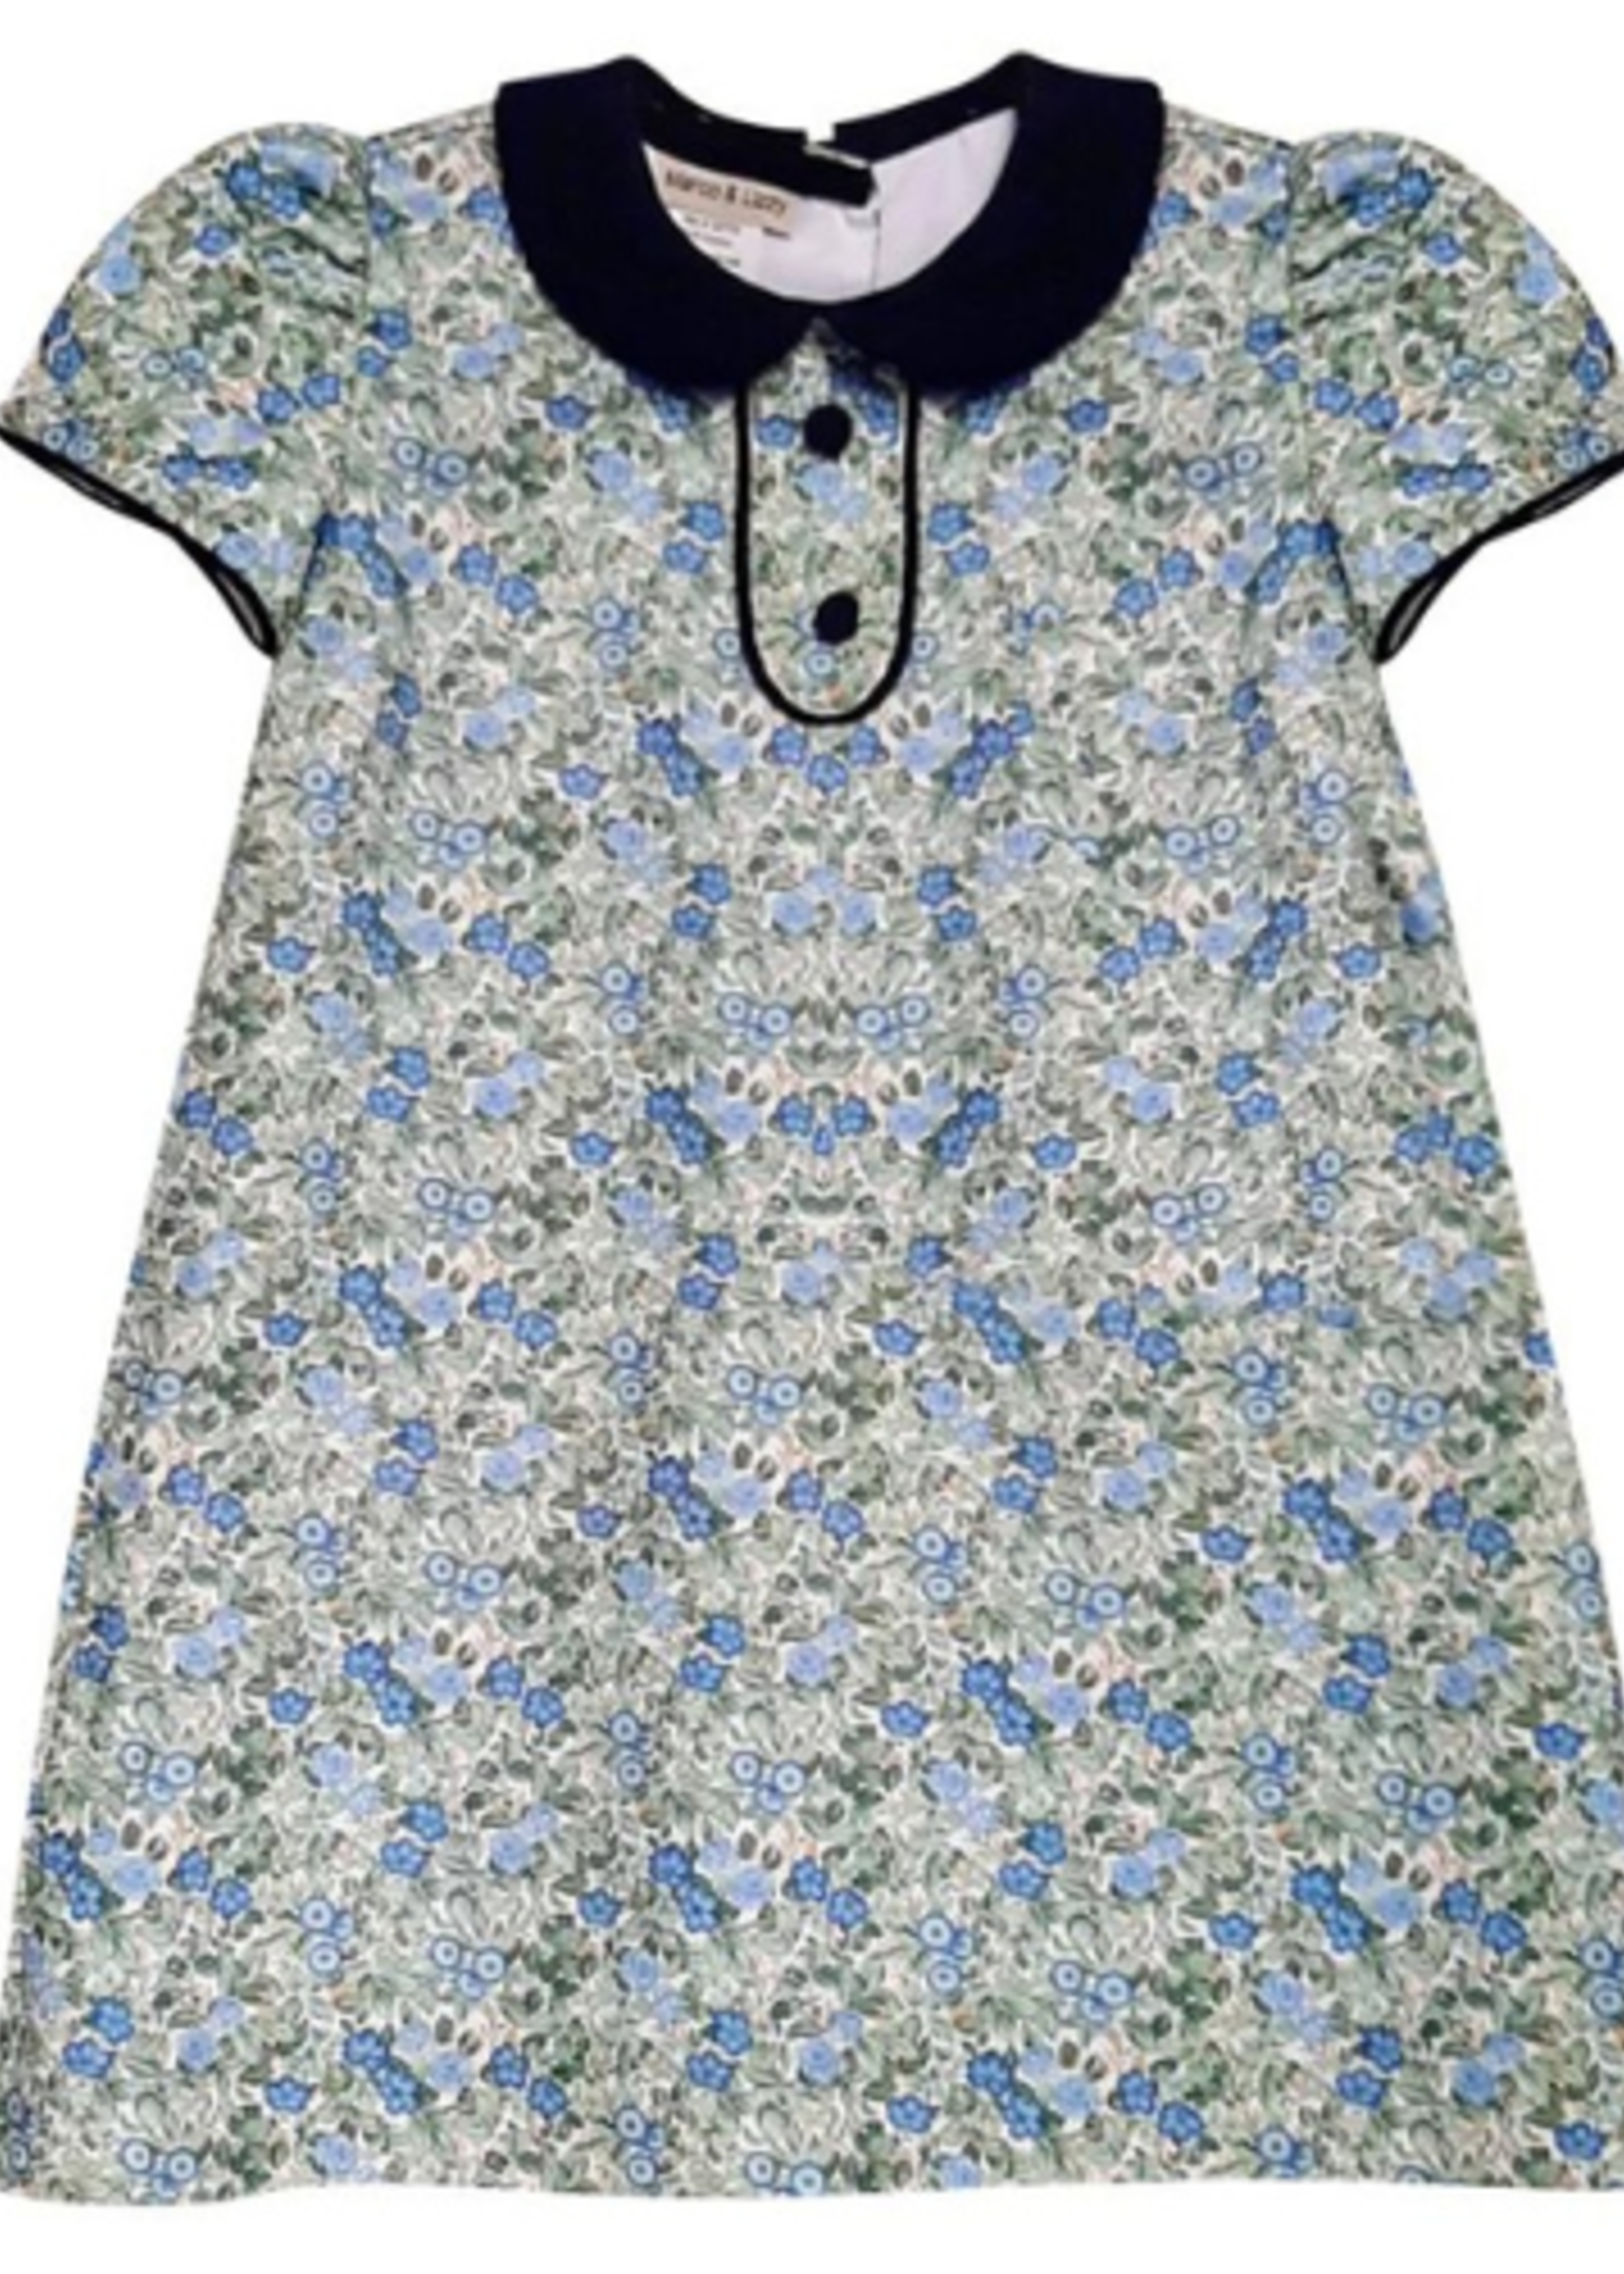 Marco & Lizzy Navy  Blue Floral Print Dress